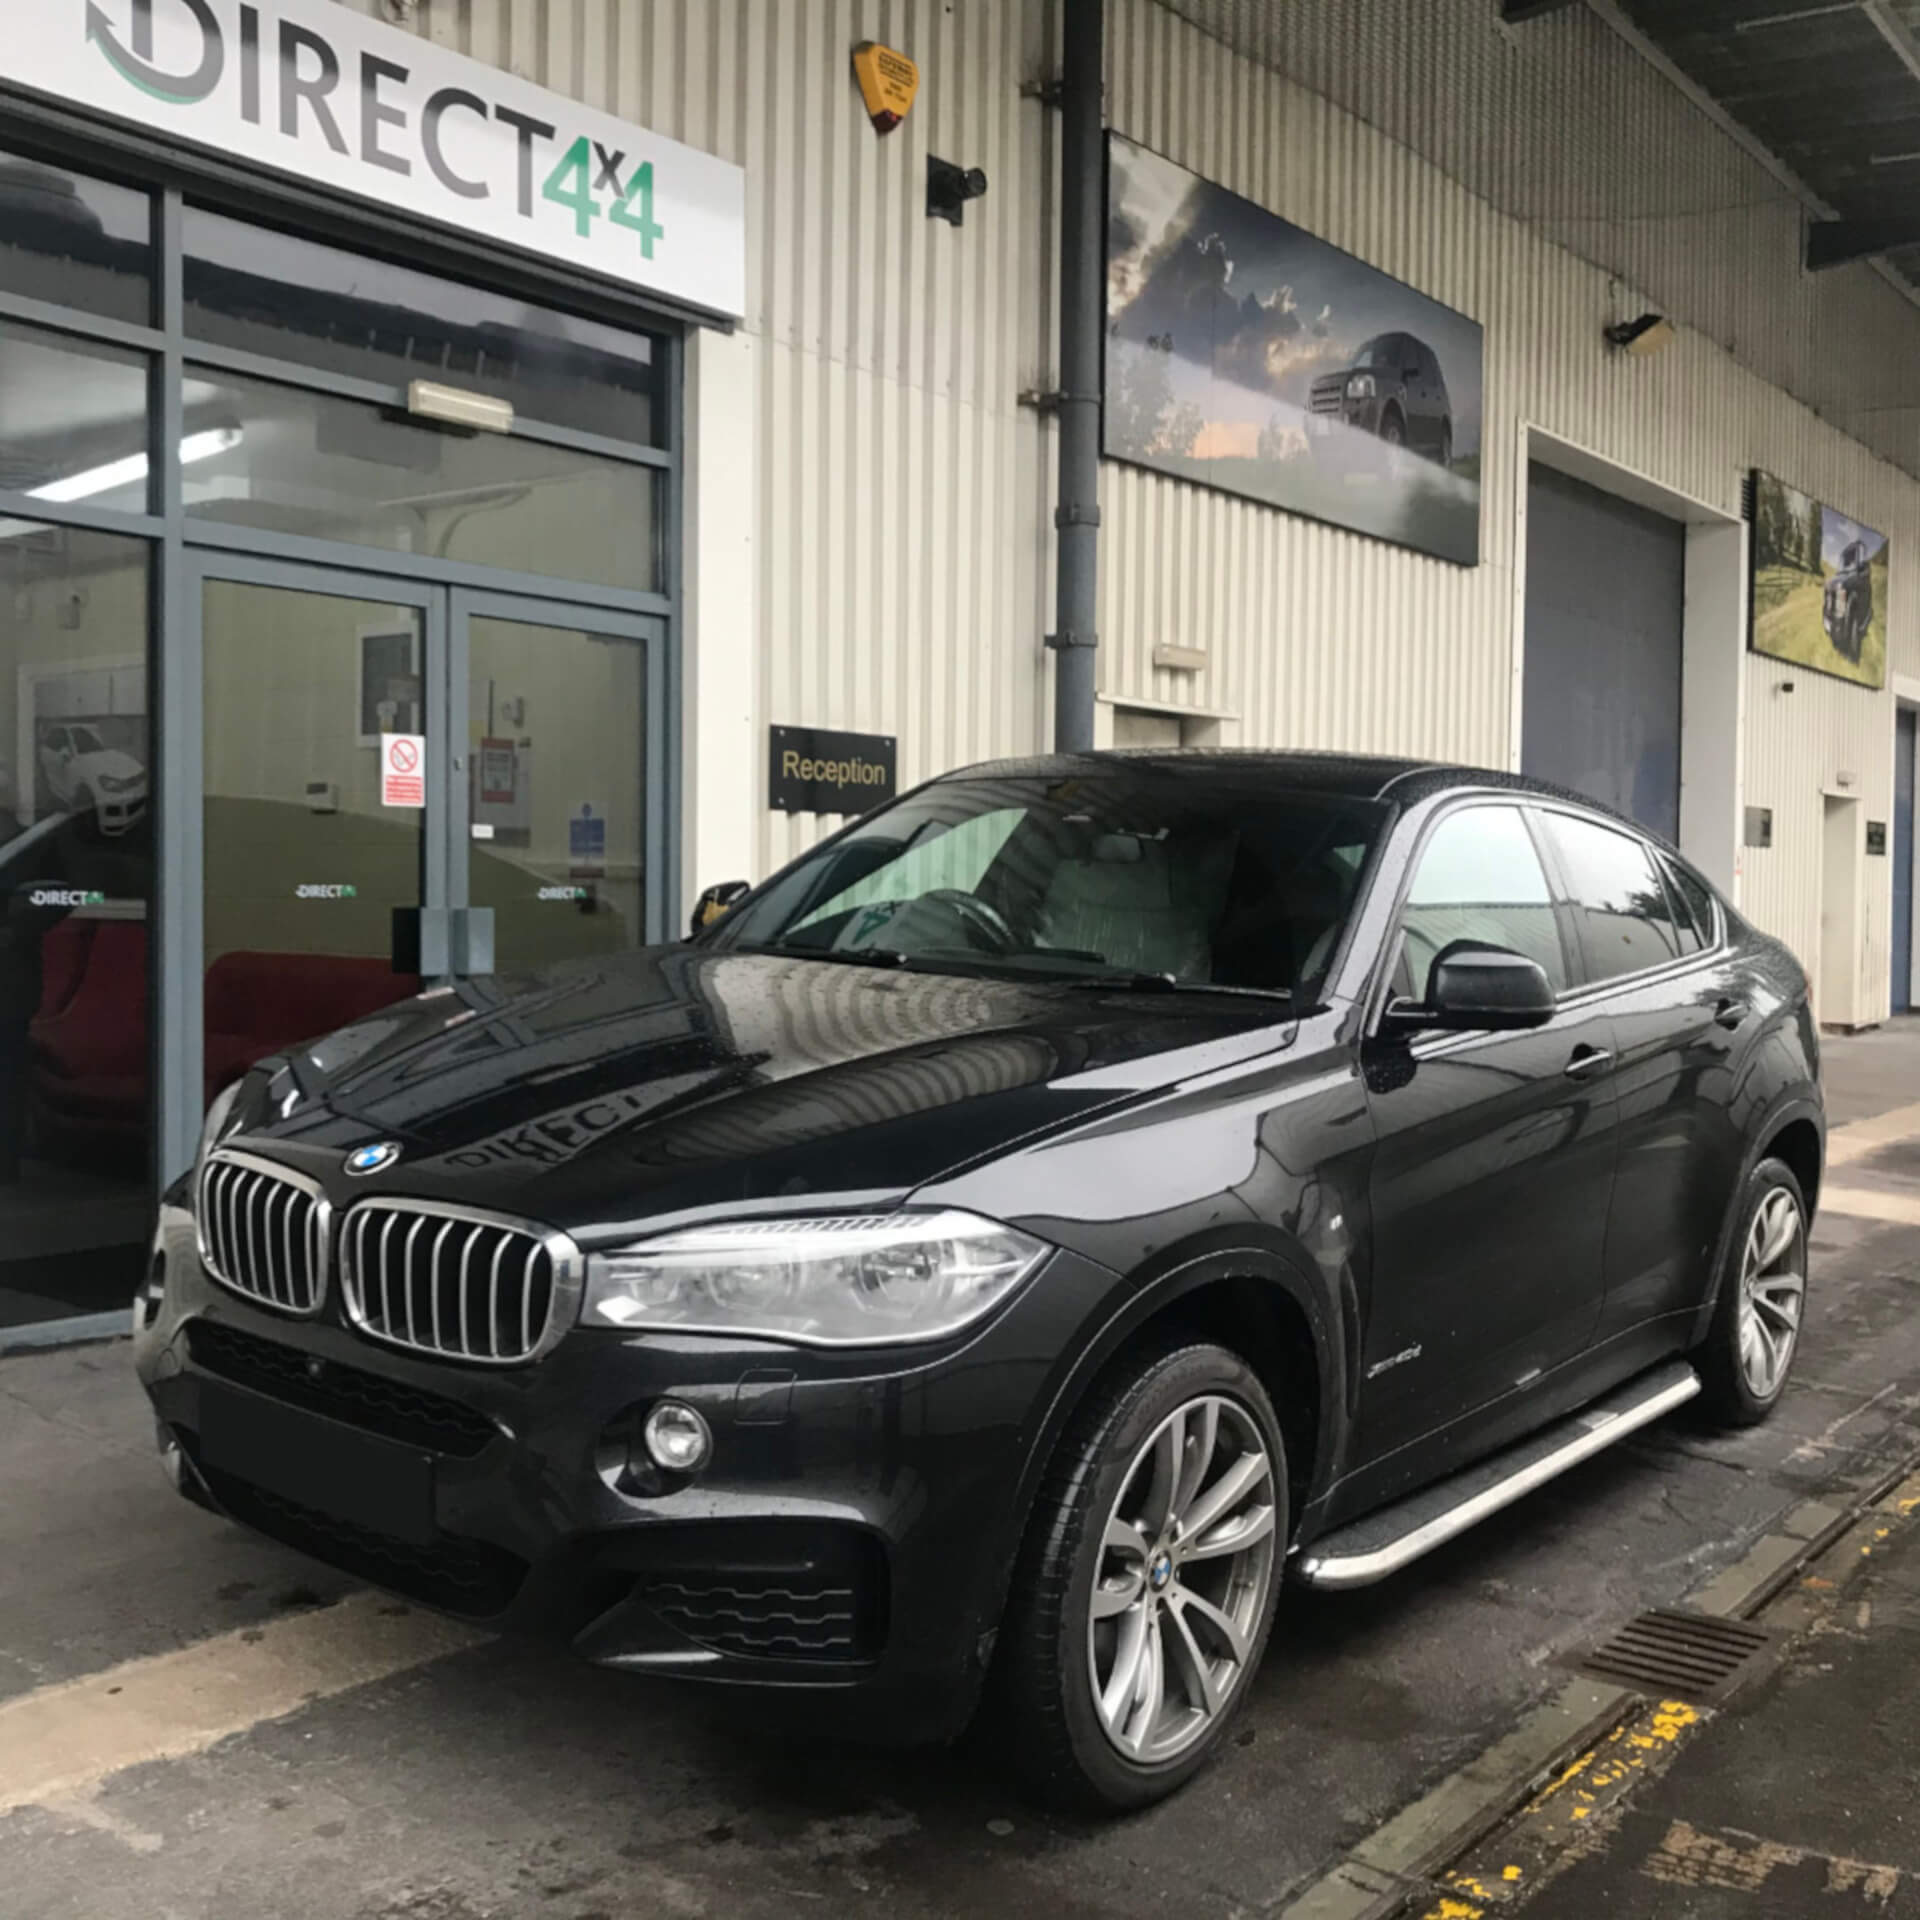 Direct4x4 Accessories for BMW X6 Vehicles